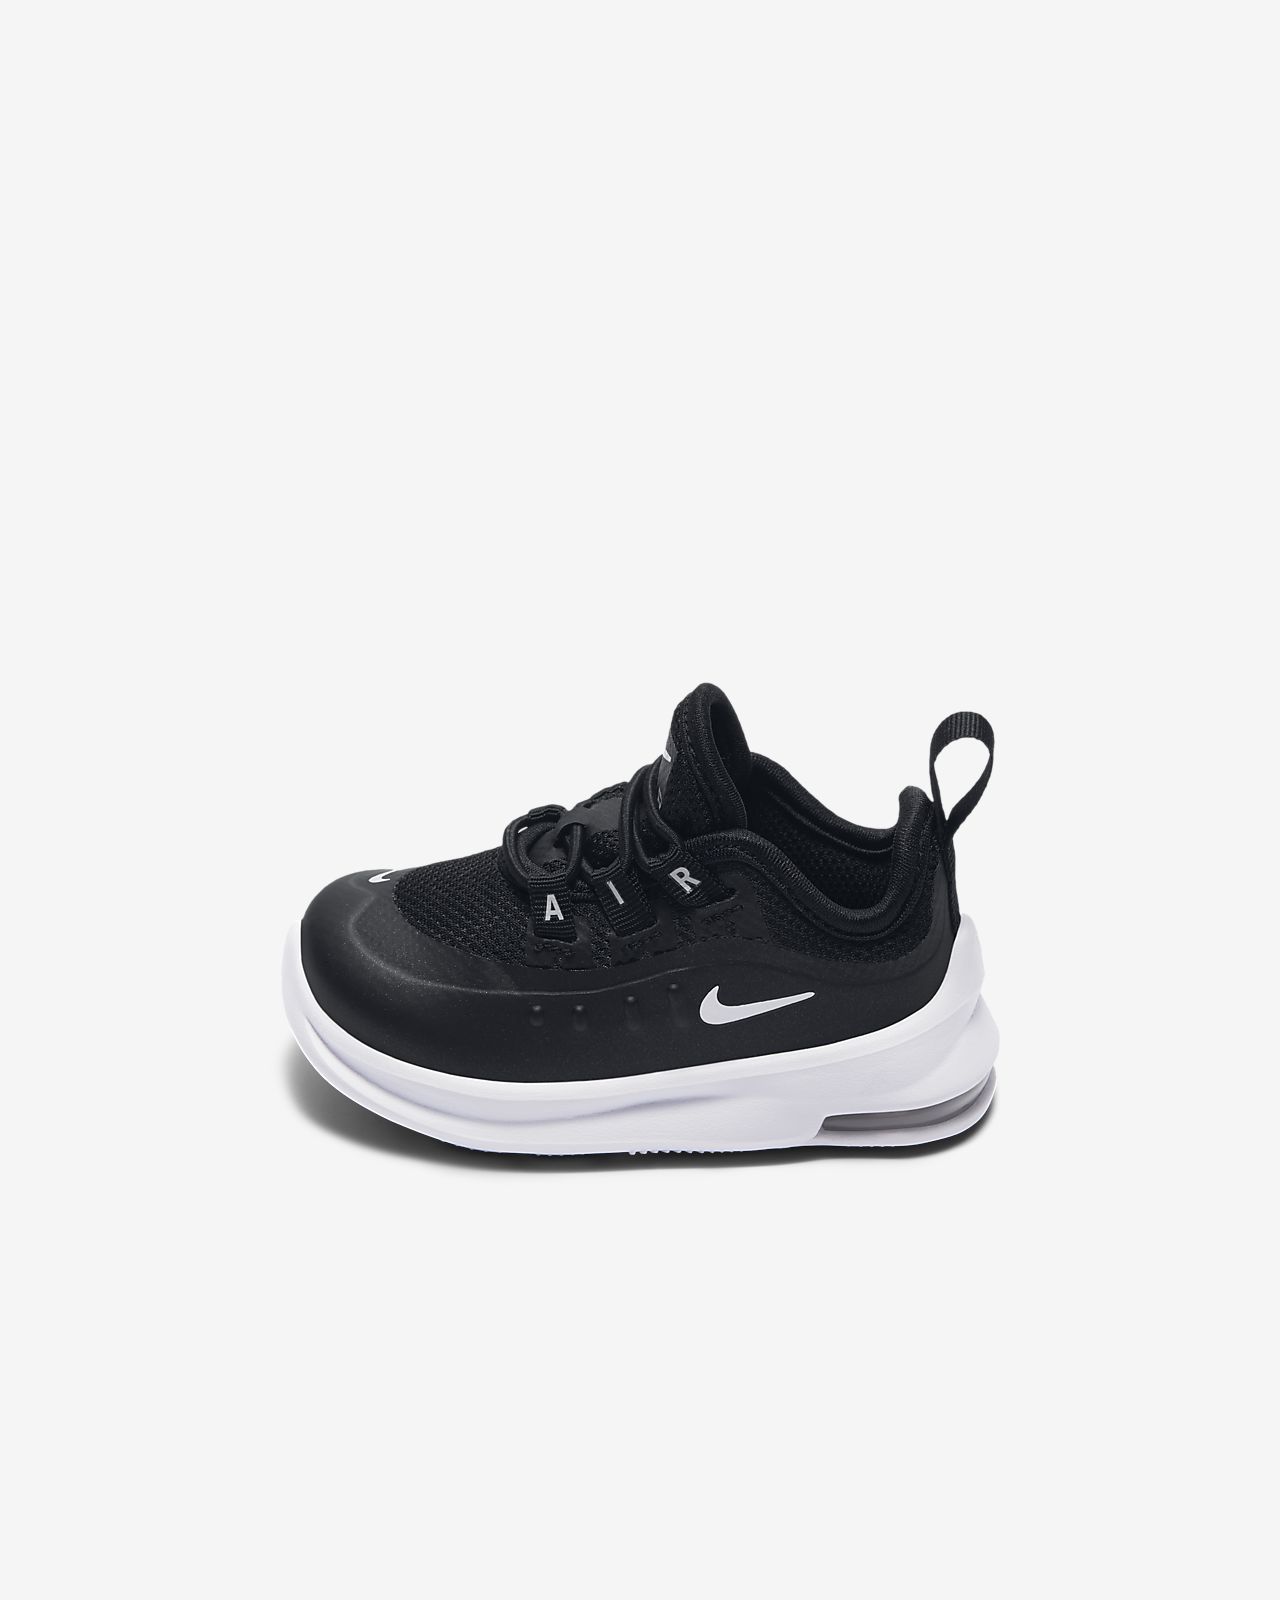 Nike Air Max Axis Infant/Toddler Shoe 